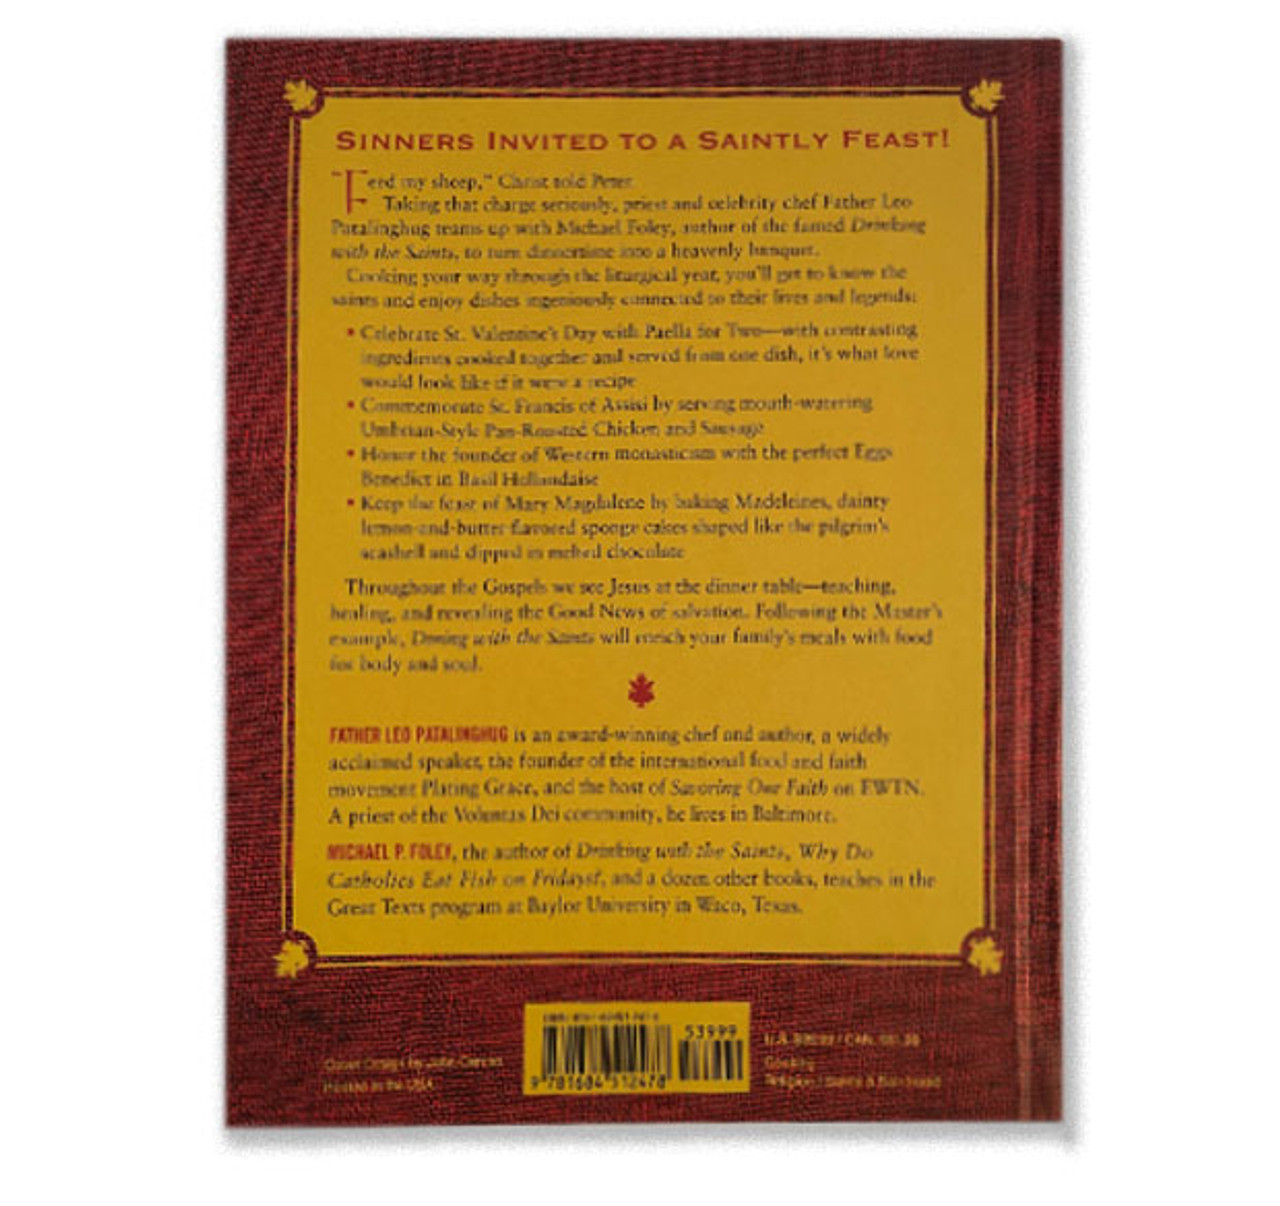 Dining with the Saints back cover